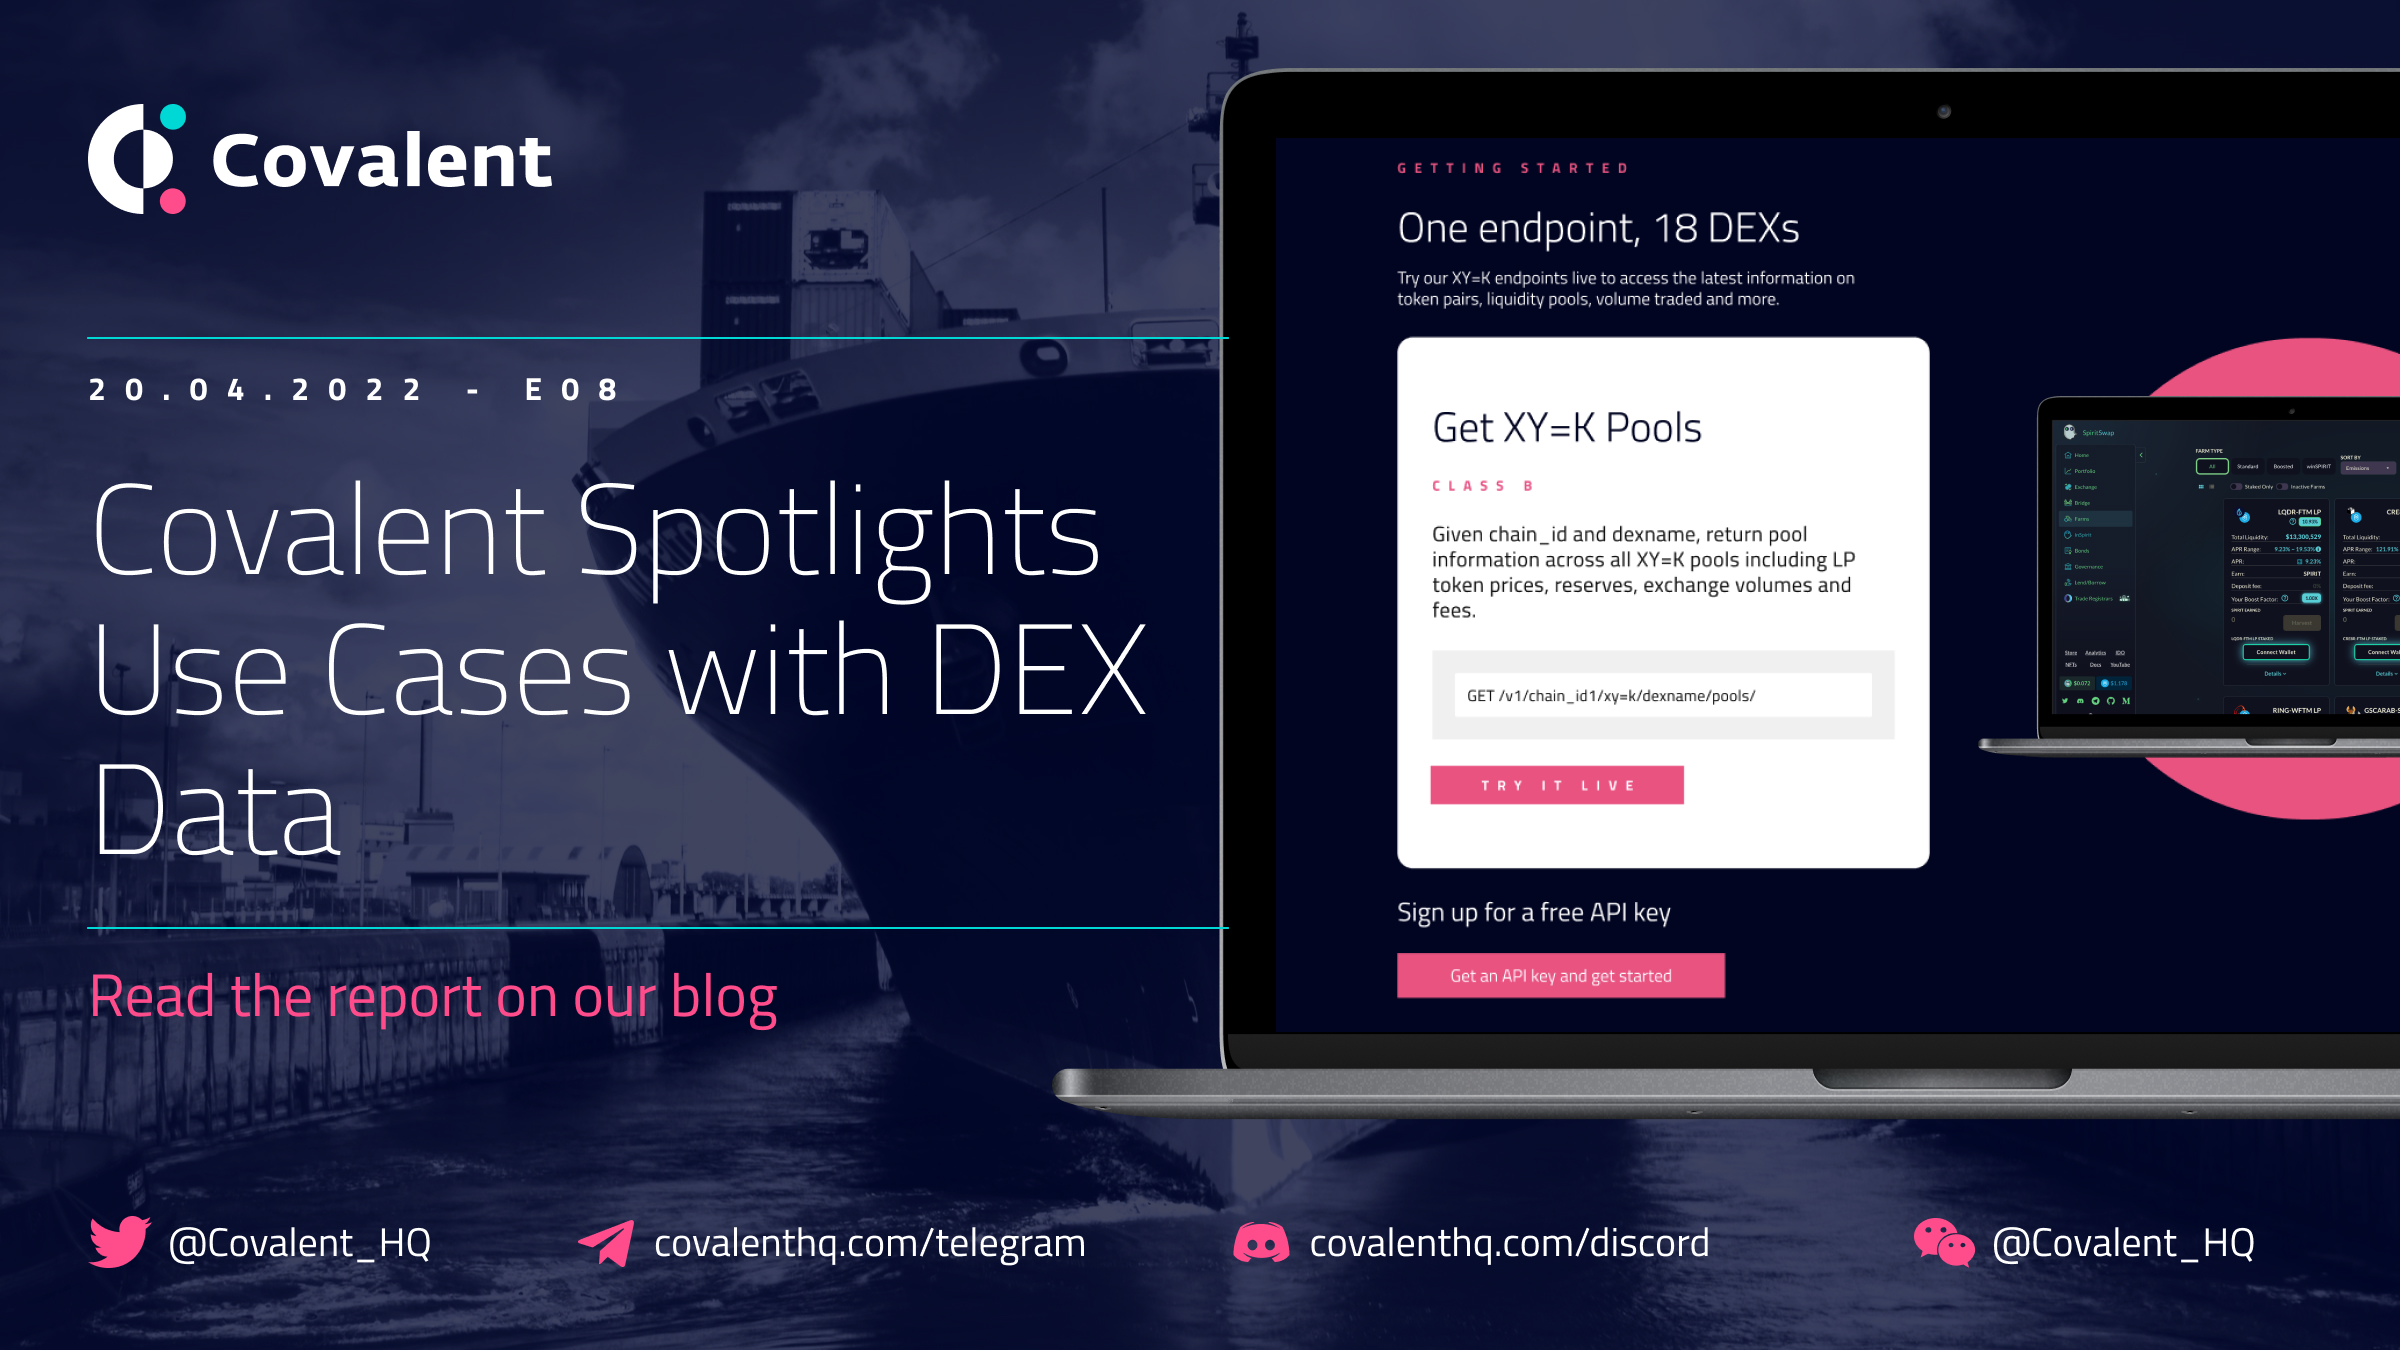 Covalent Spotlights Use Cases with DEX Data